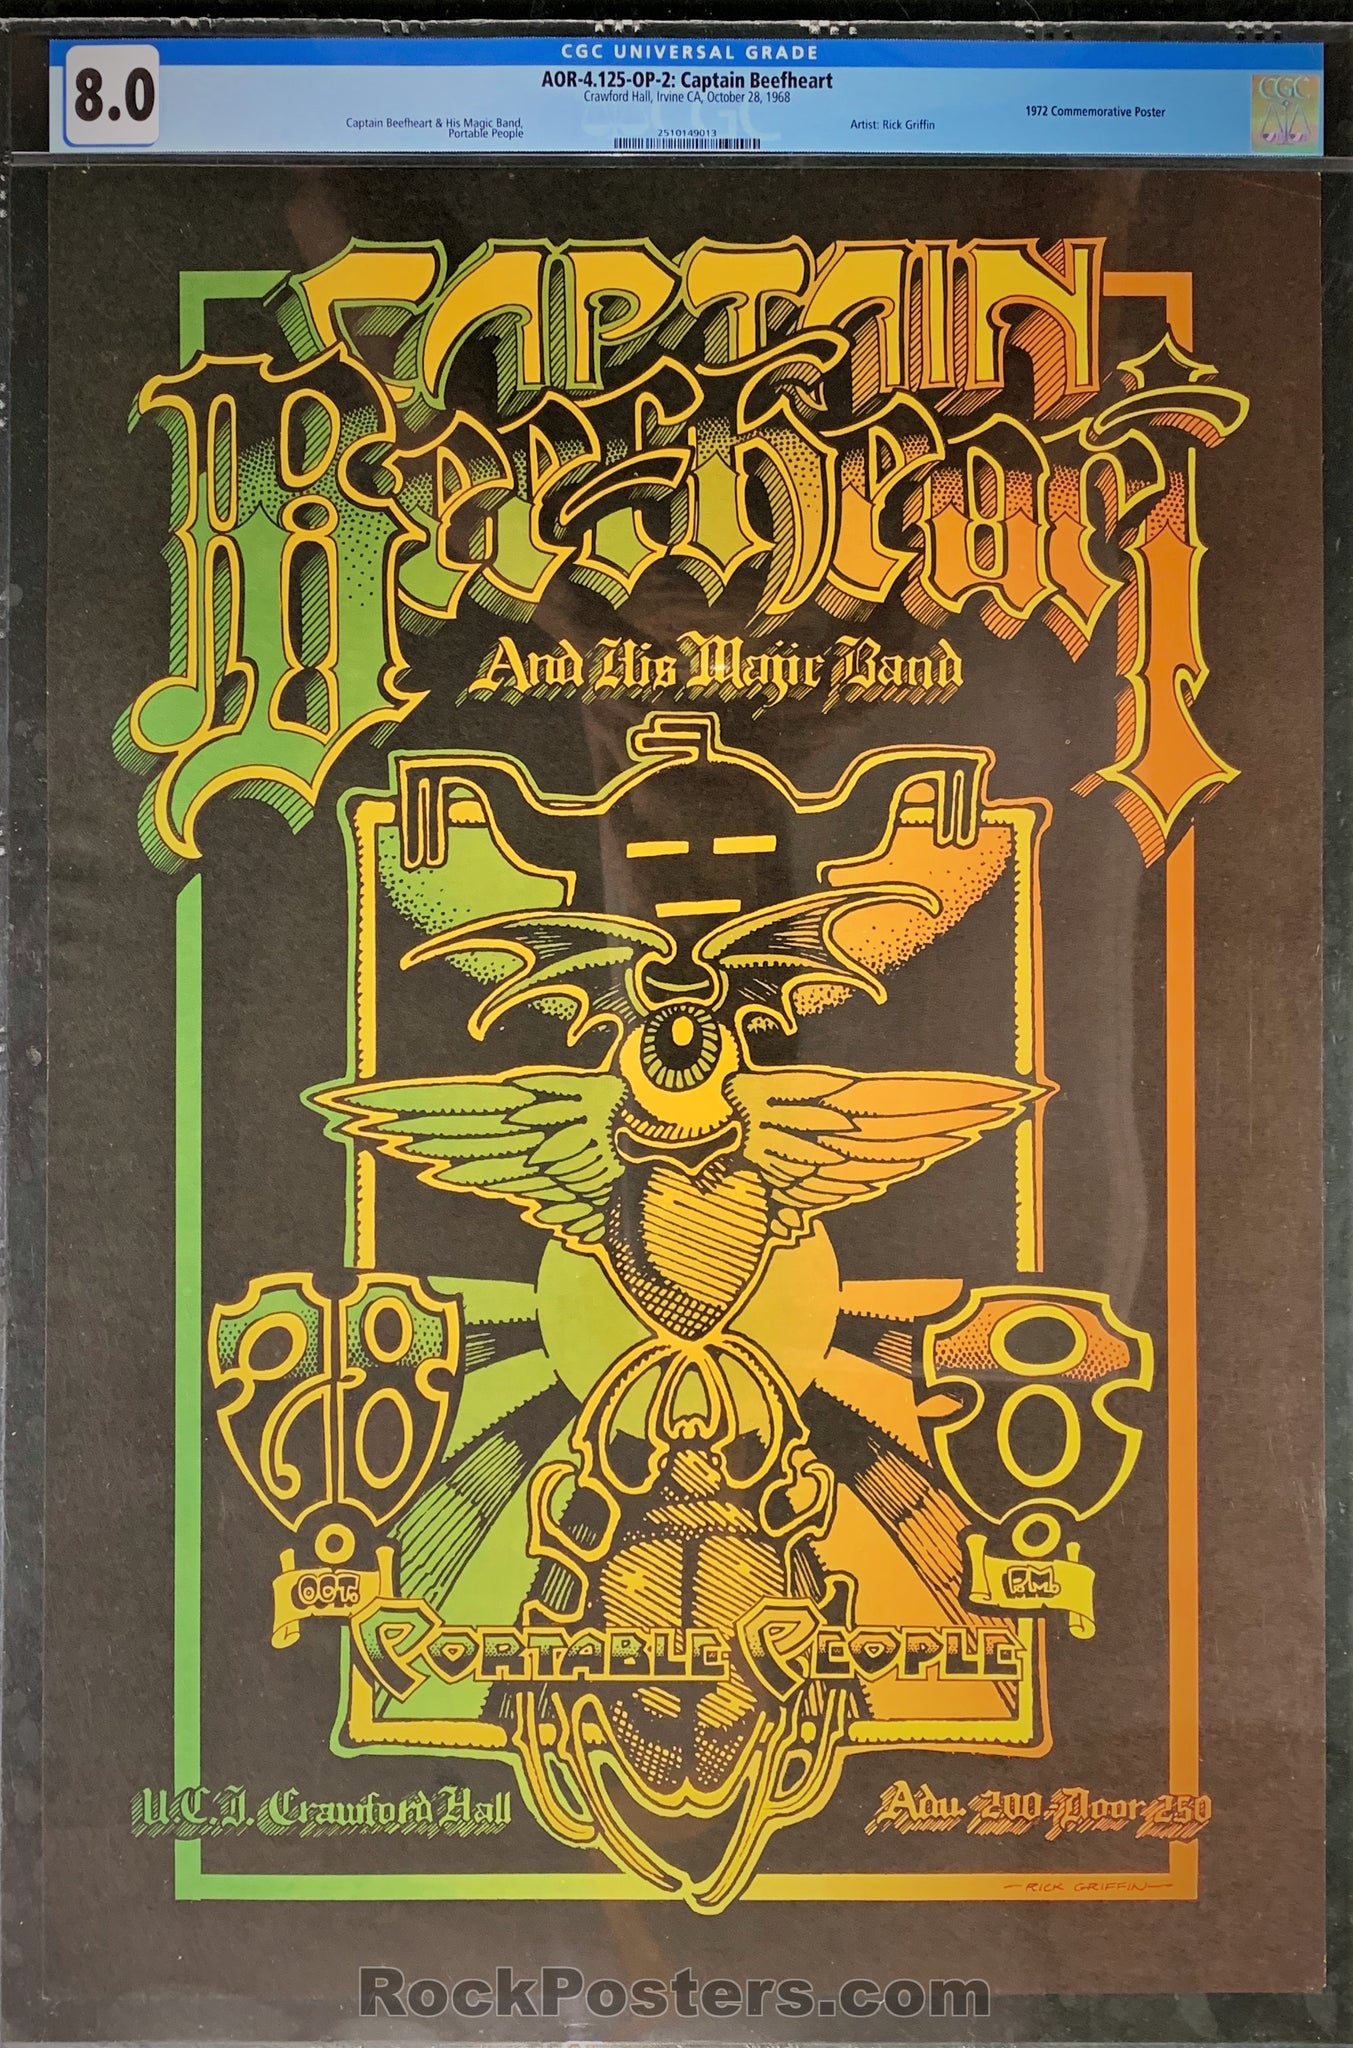 AUCTION - AOR4.125 - Captain Beefheart & His Magic Band Poster - U.C. Irvine - Condition - CGC Graded 8.0